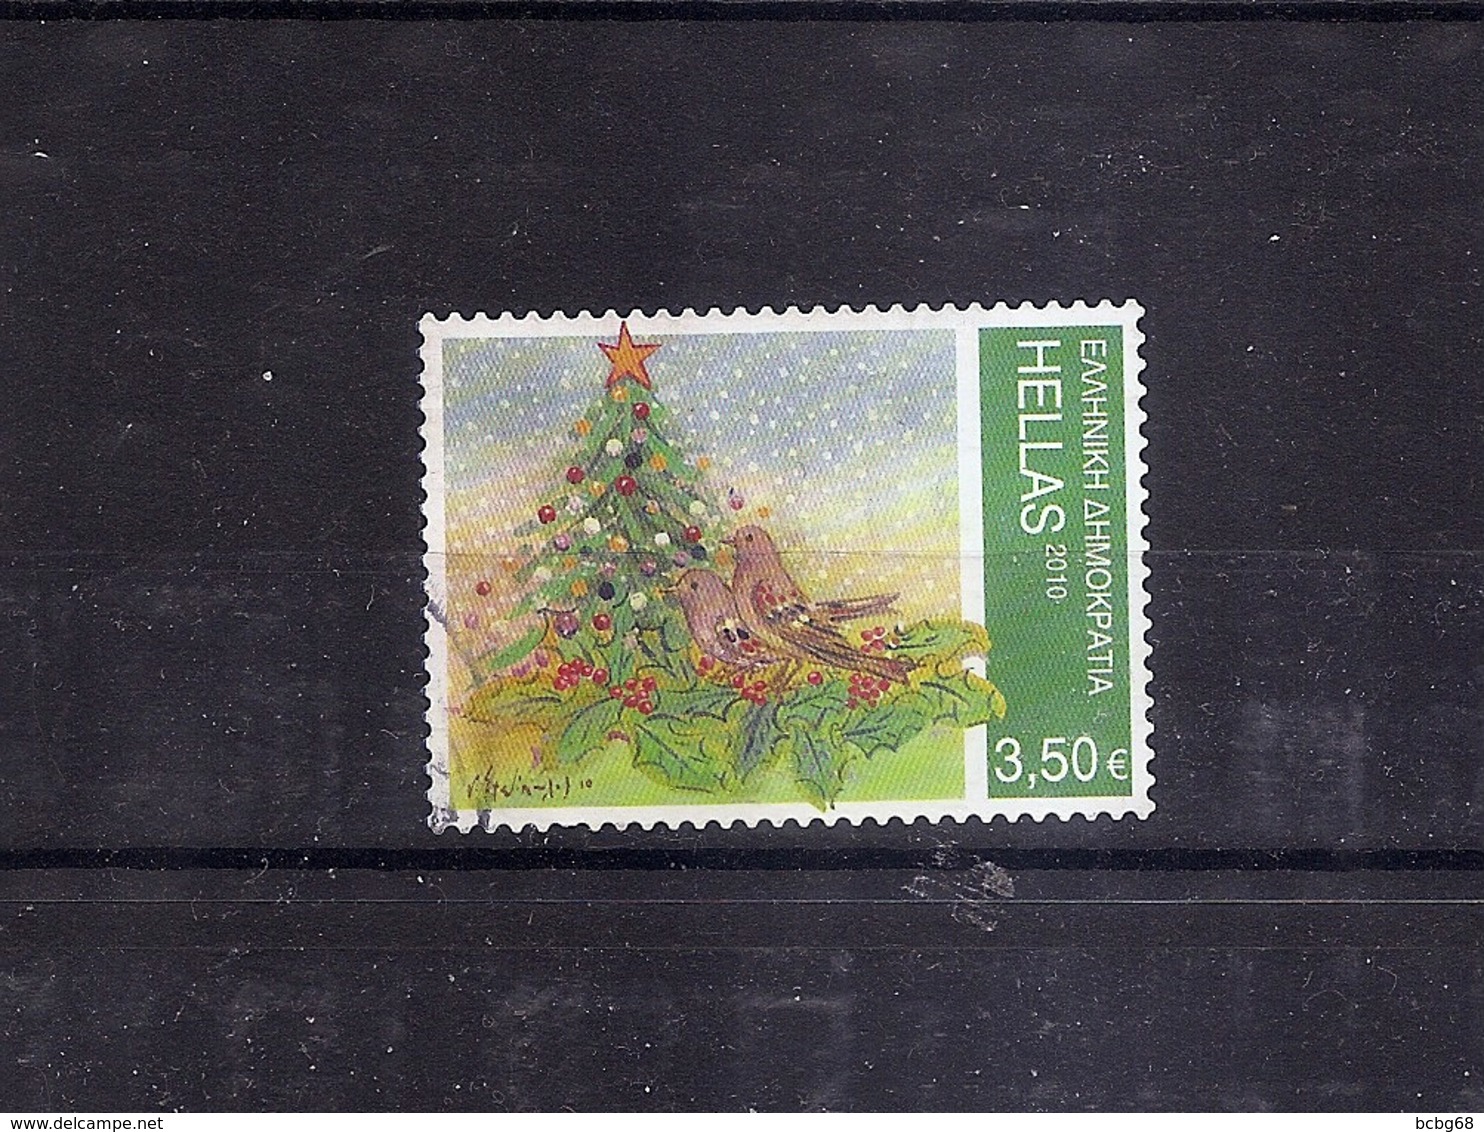 GREECE - Christmas 2010 Scott 2464 - Used - Used Stamps